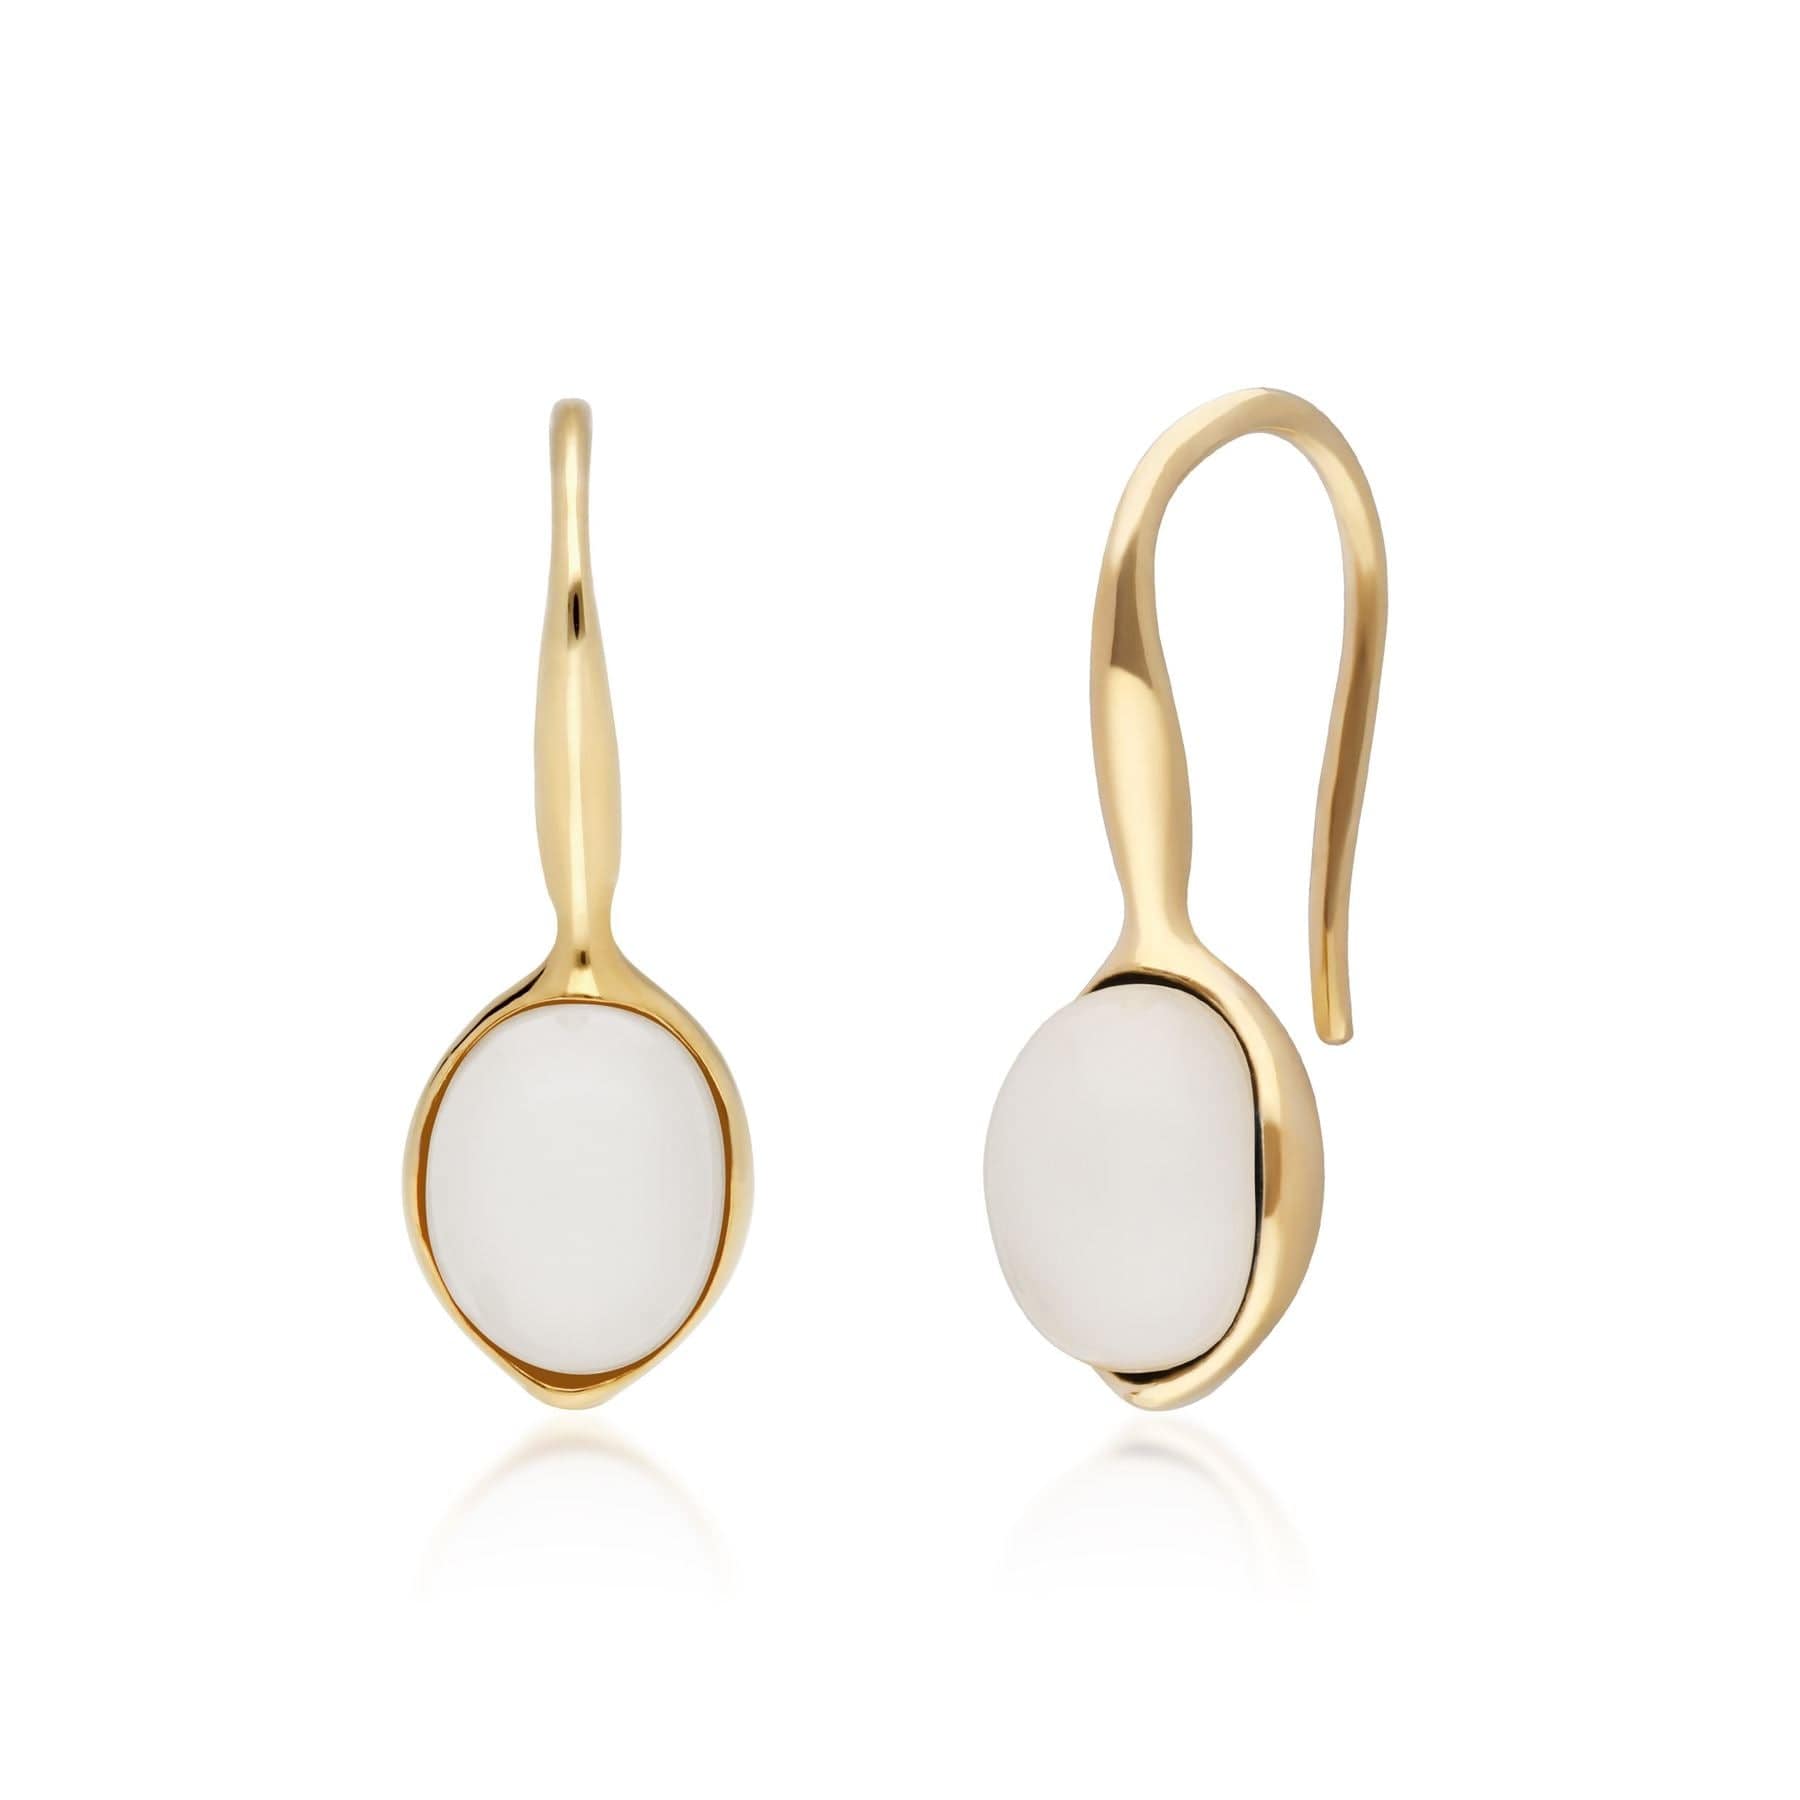 Irregular B Gem Moonstone Drop Earrings in Yellow Gold Plated Sterling Silver